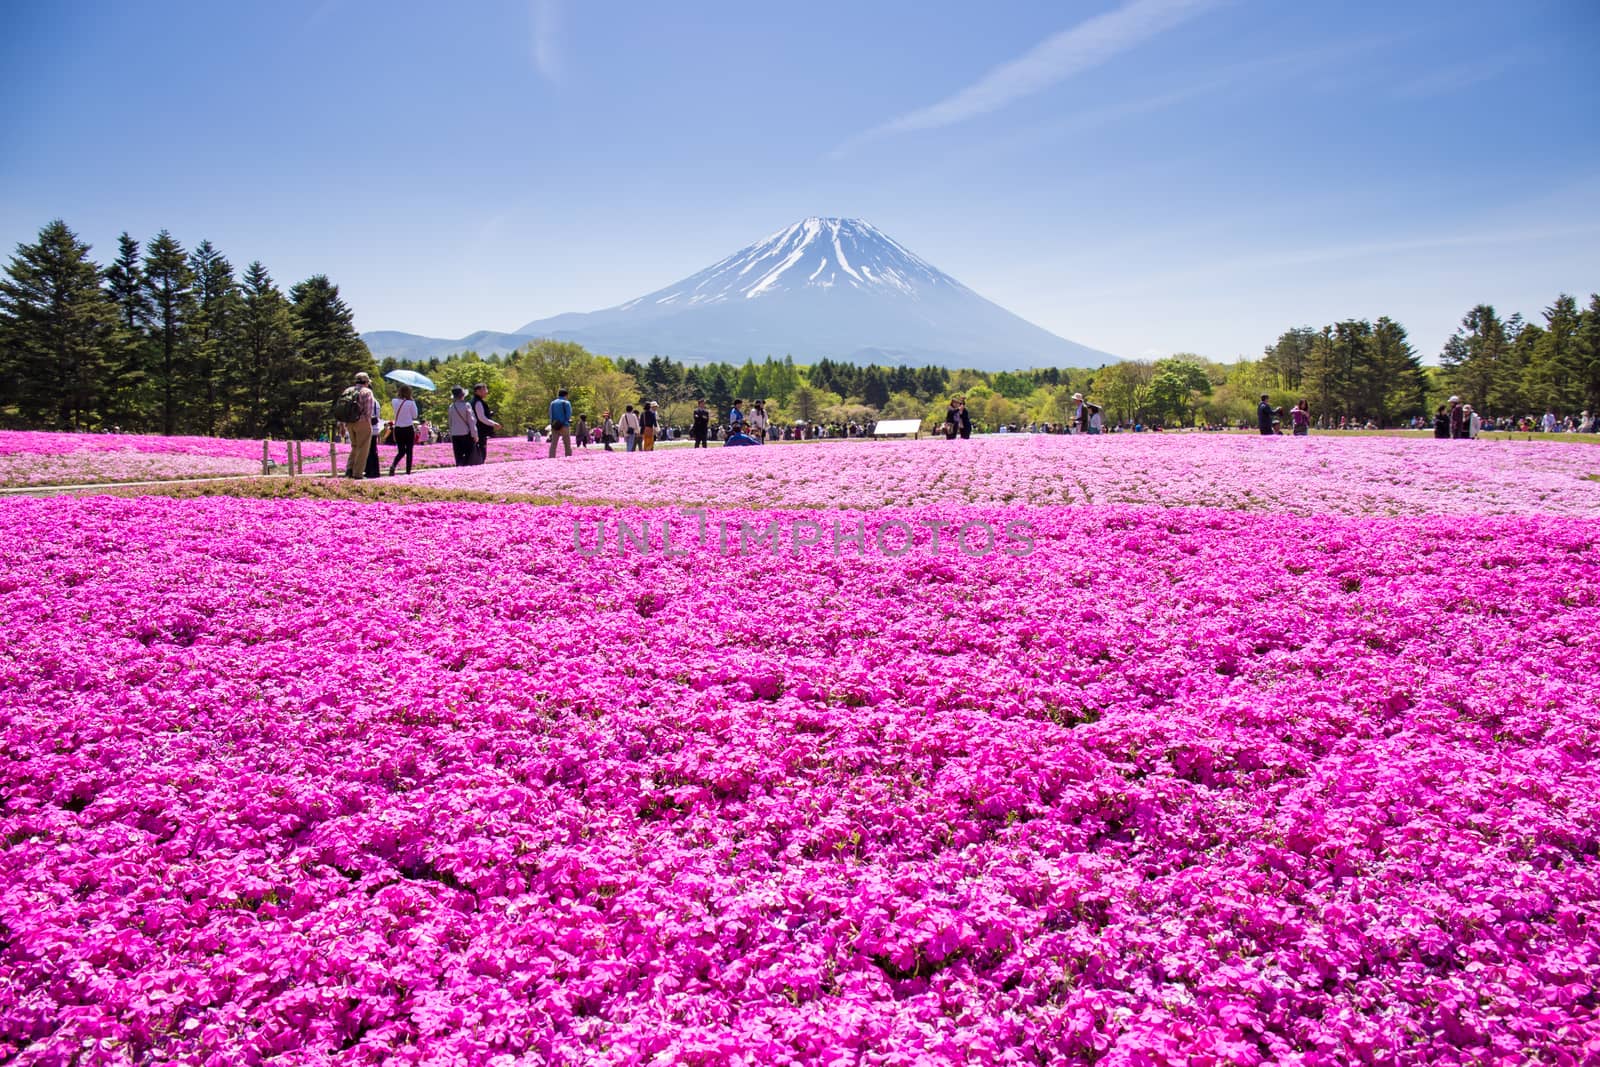 NASHIYAMA, JAPAN- 11 MAY. 2015: People from Tokyo and other cities or internatoinal come to Mt. Fuji and enjoy the cherry blossom at spring every year. Mt. Fuji is the highest mountain in Japan. by powerbeephoto